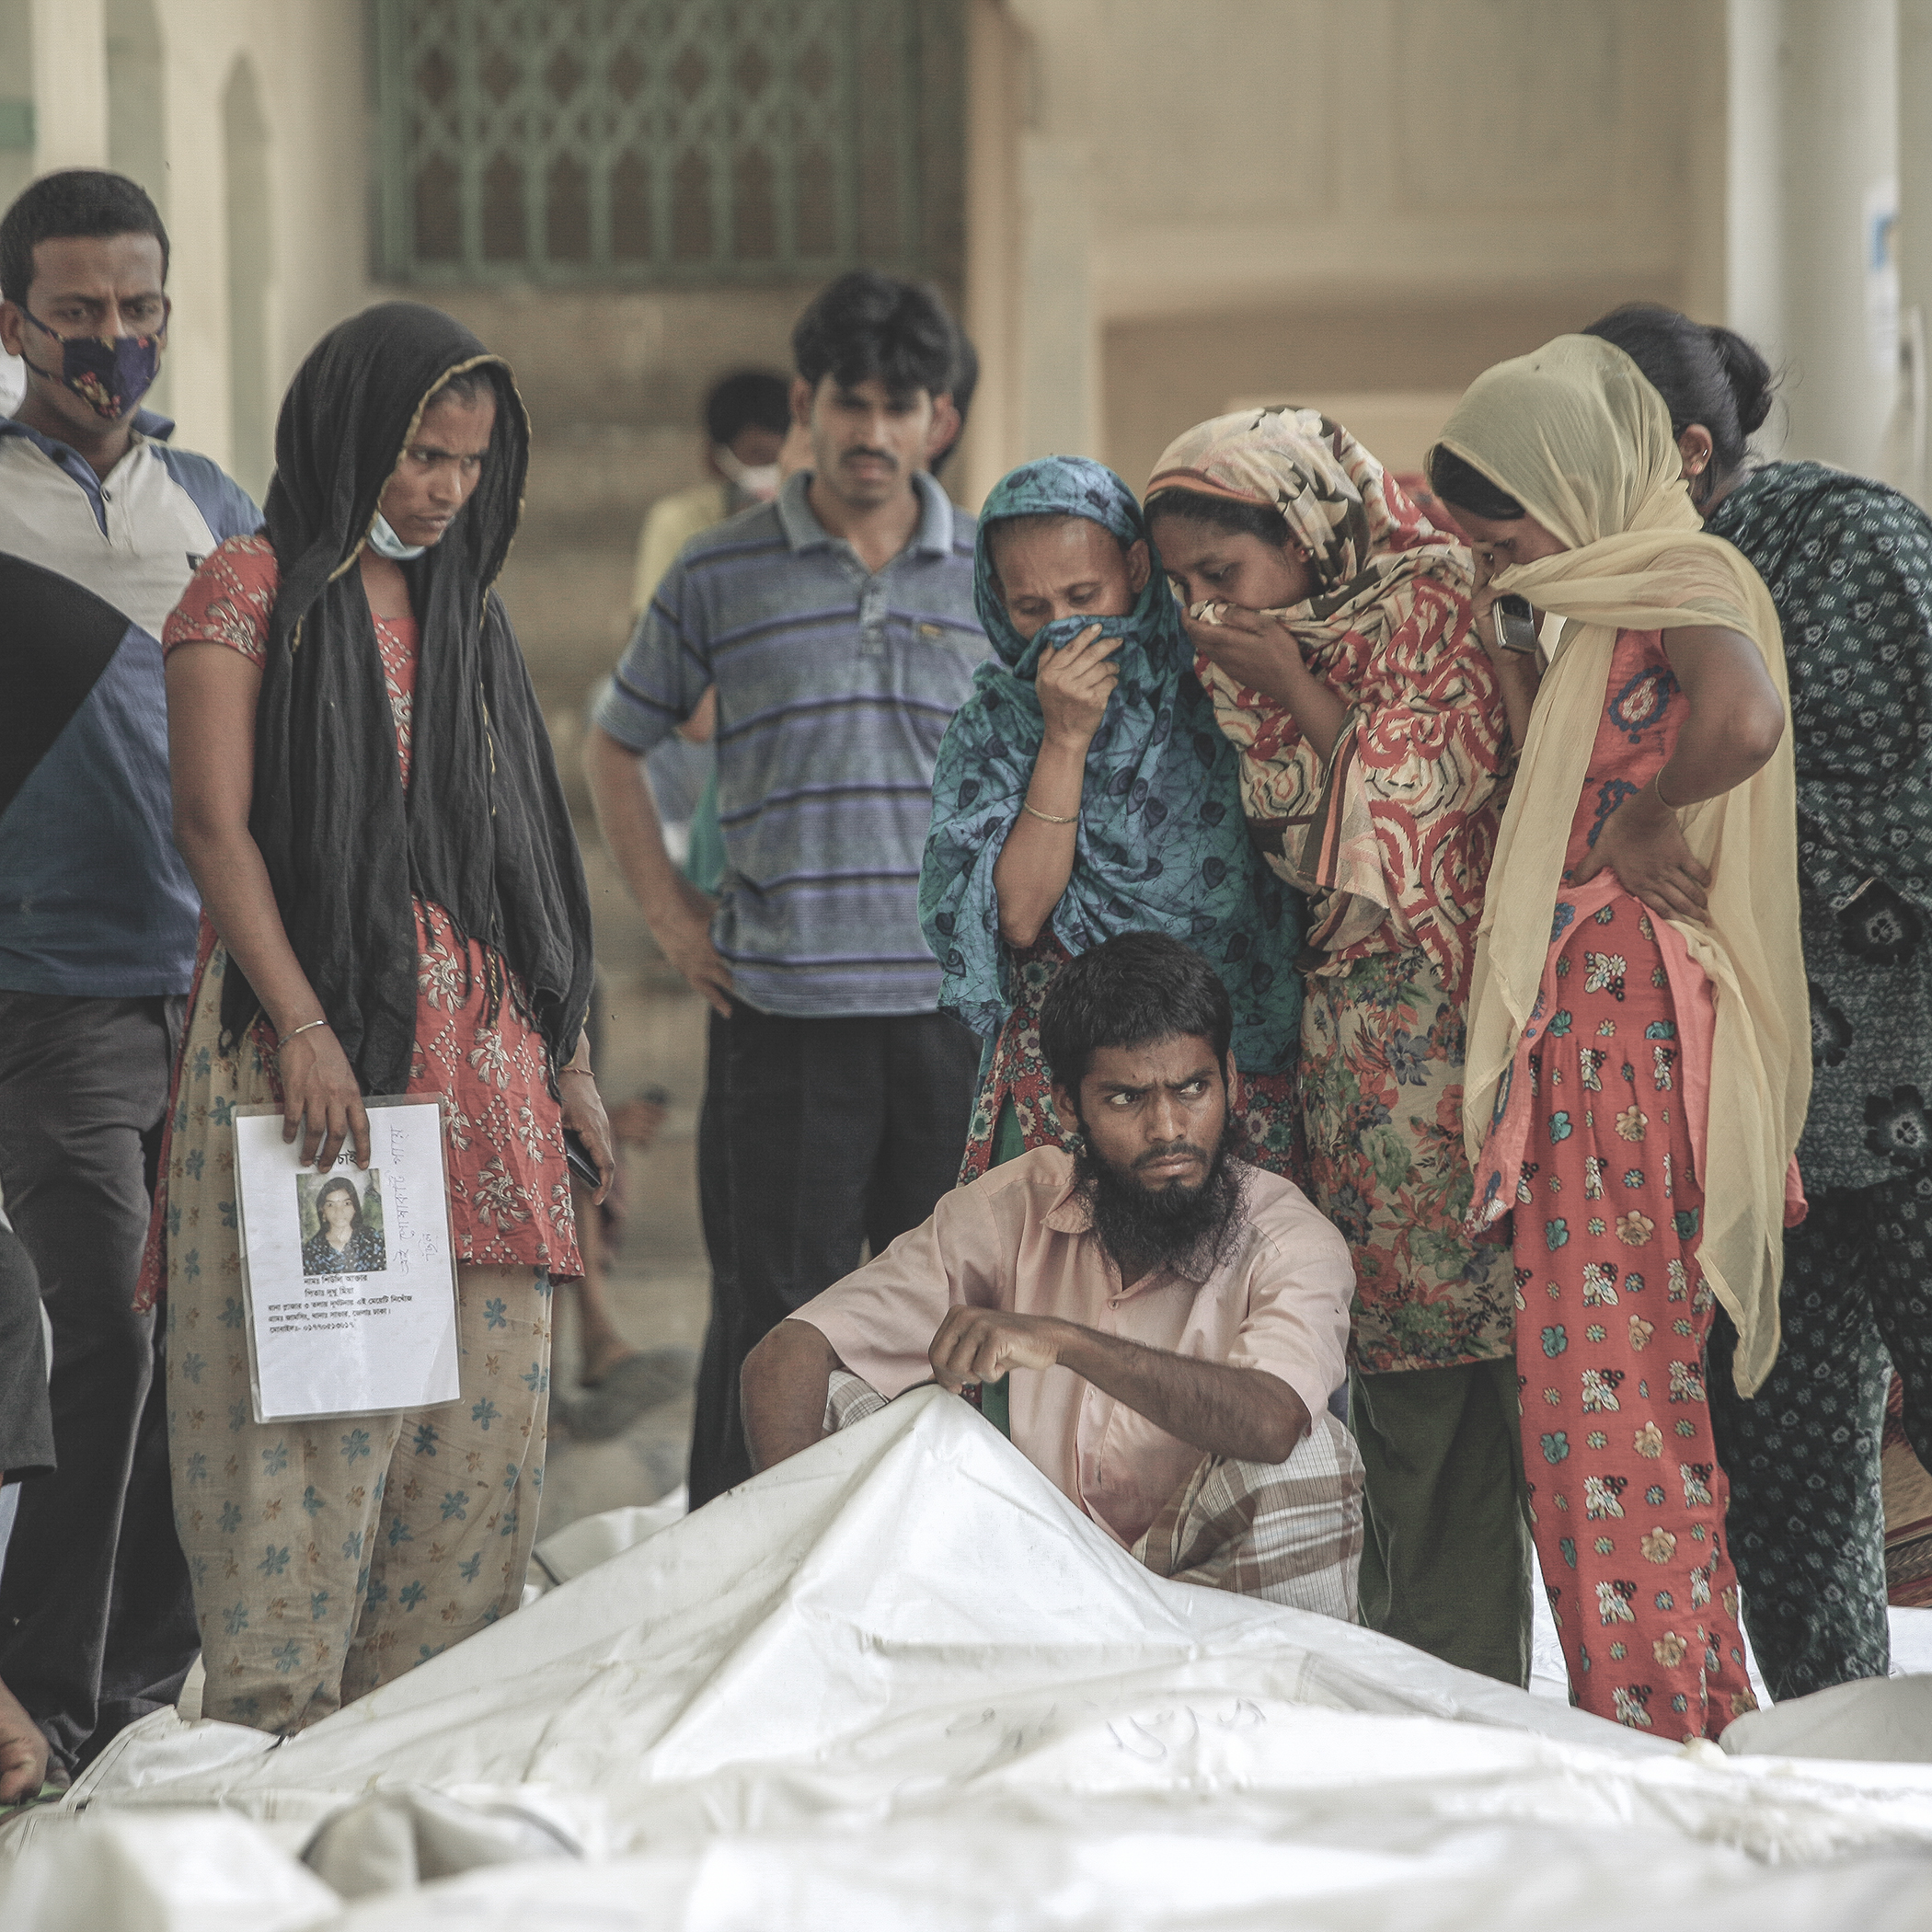 Dead body of a Rana Plaza incident victim in front of relatives  of lost people